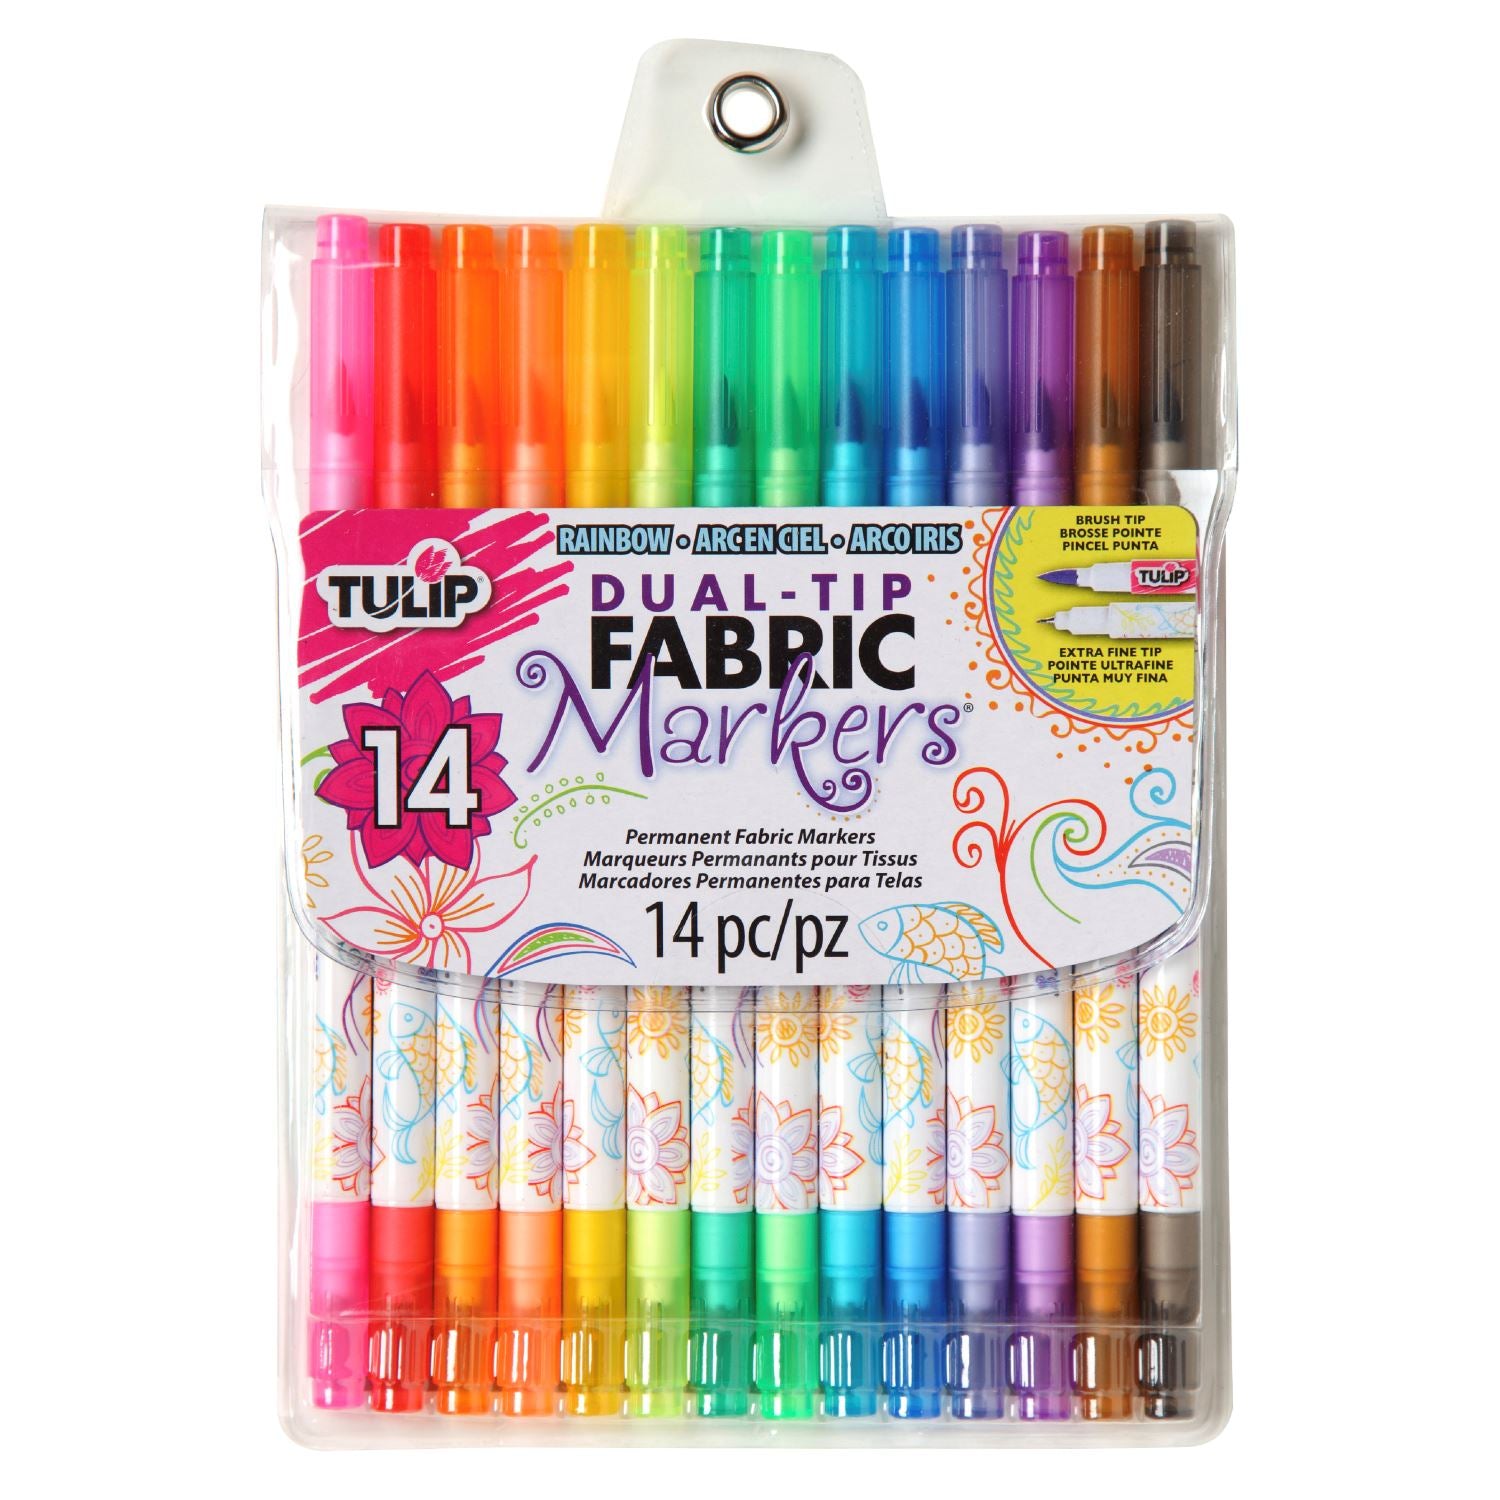 Tulip Dual-Tip Fabric Markers Rainbow 14 Pack - 1